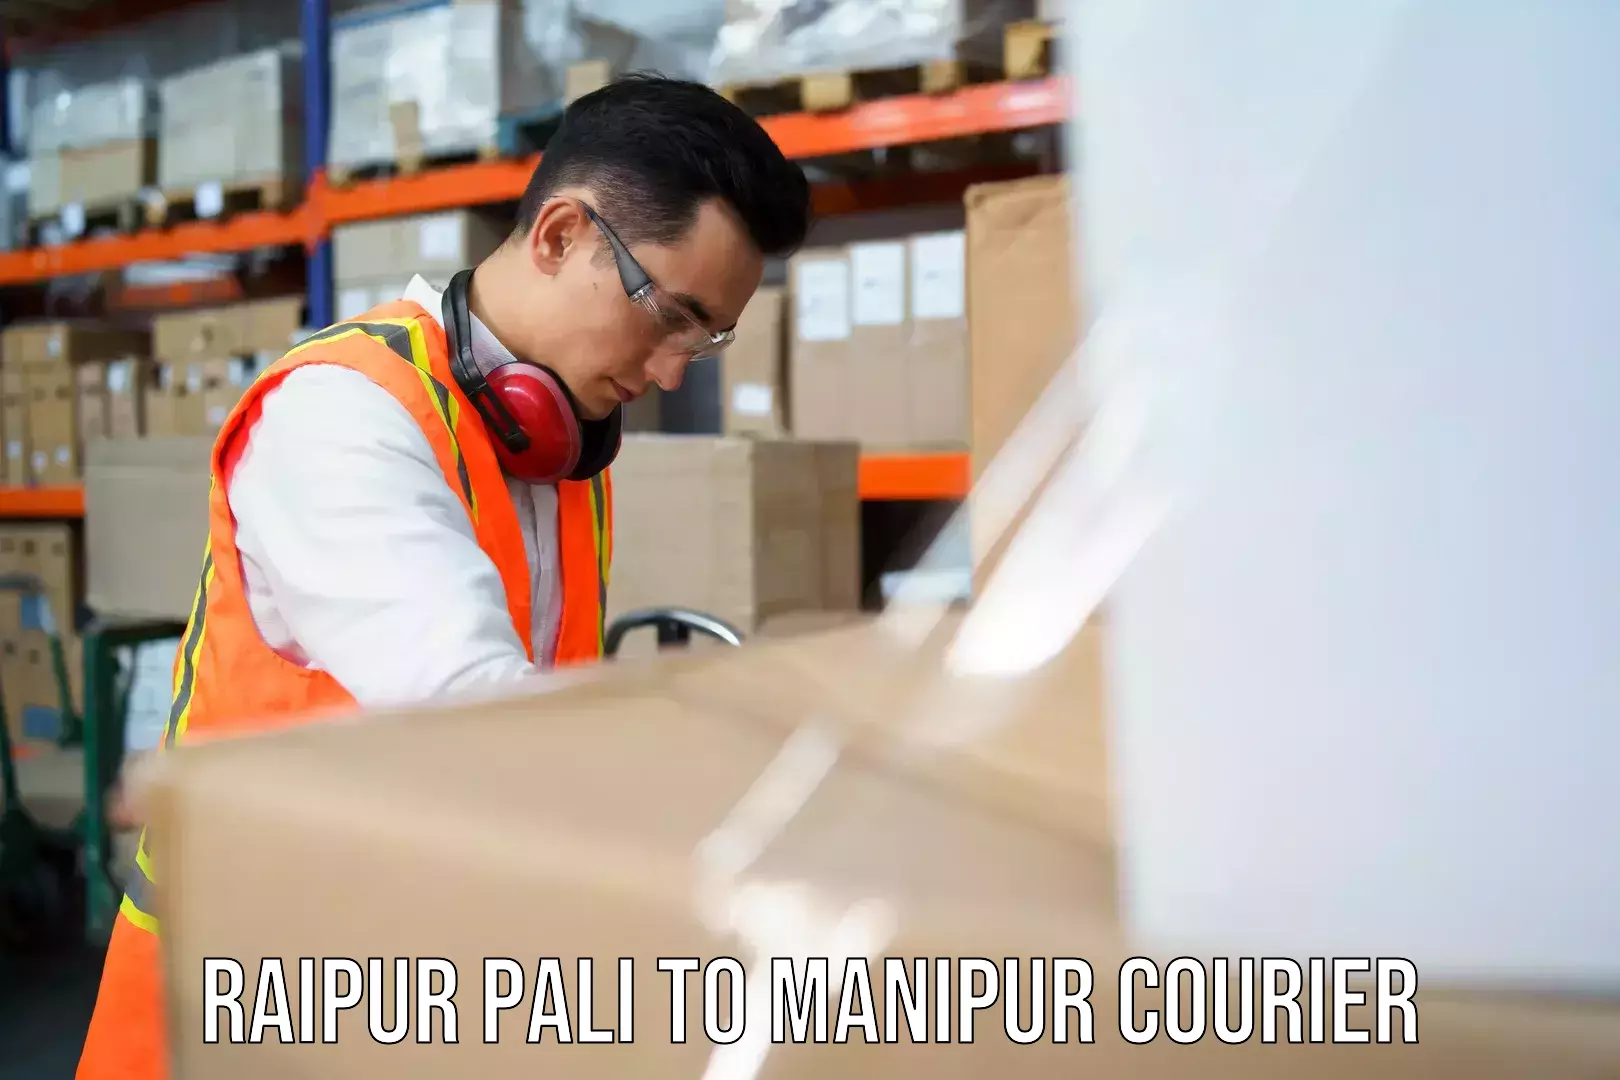 Express delivery solutions Raipur Pali to Imphal